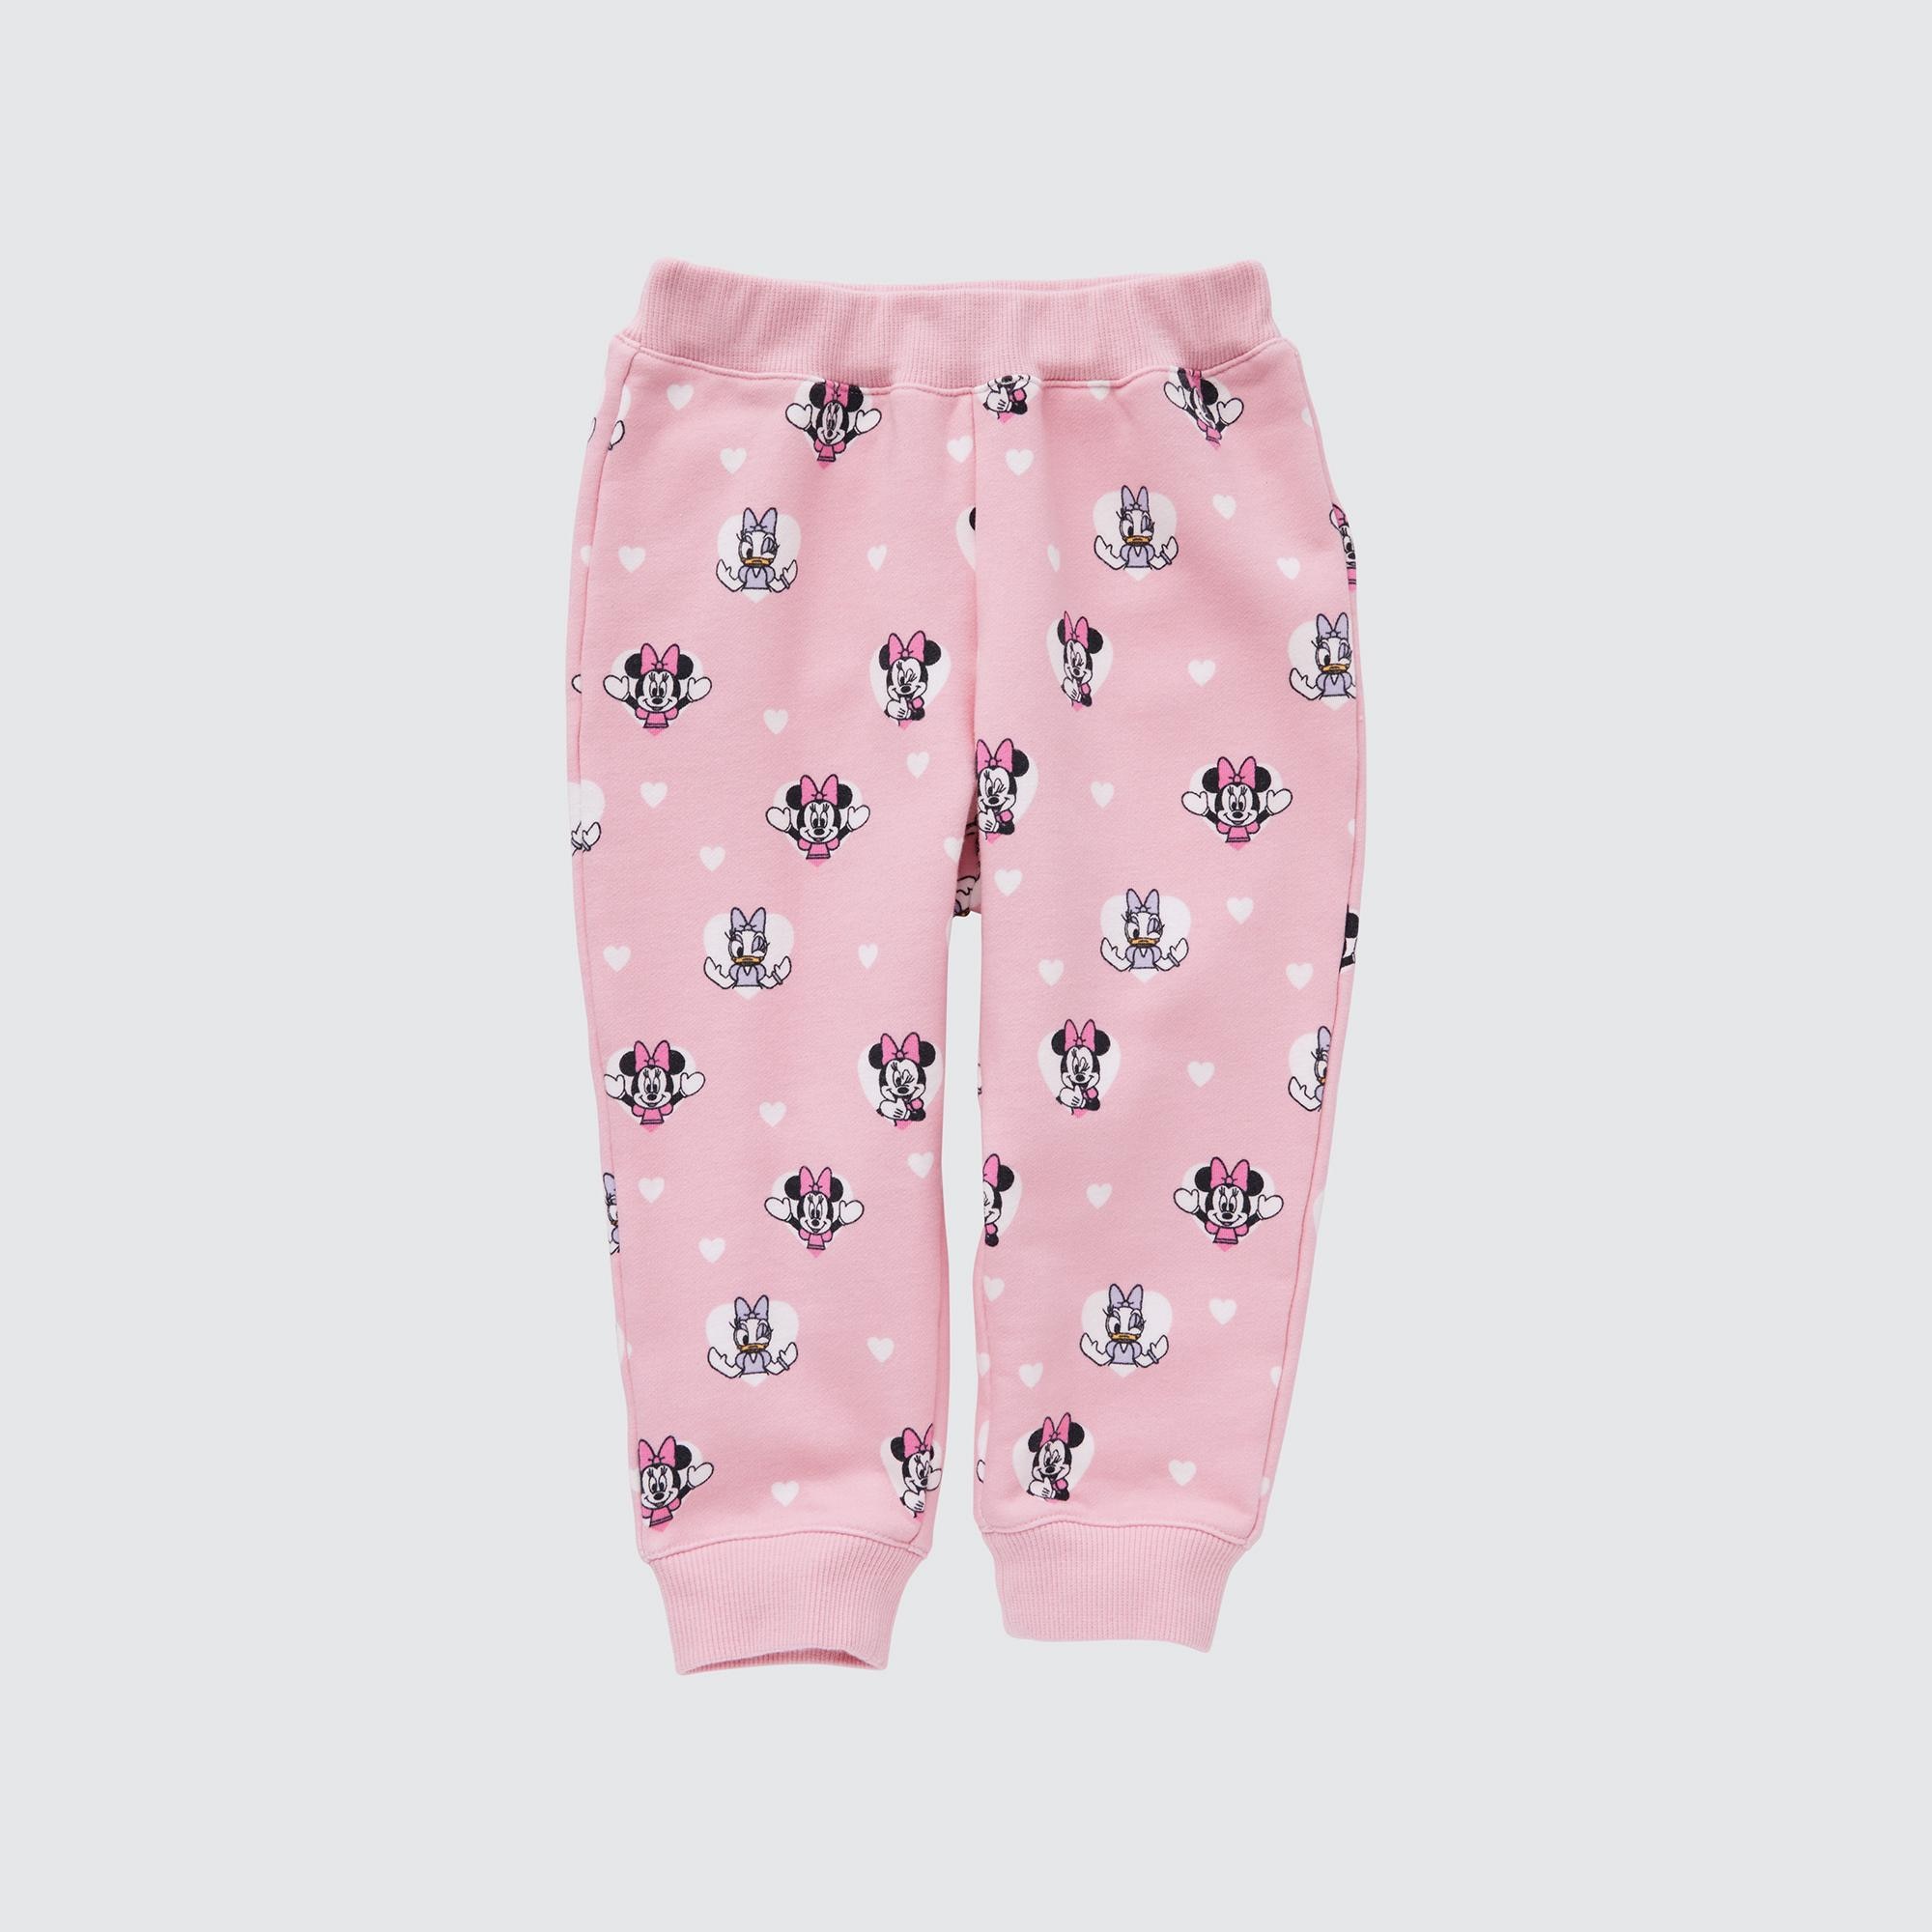 Toddler Bring a smile with Disney UT Joggers